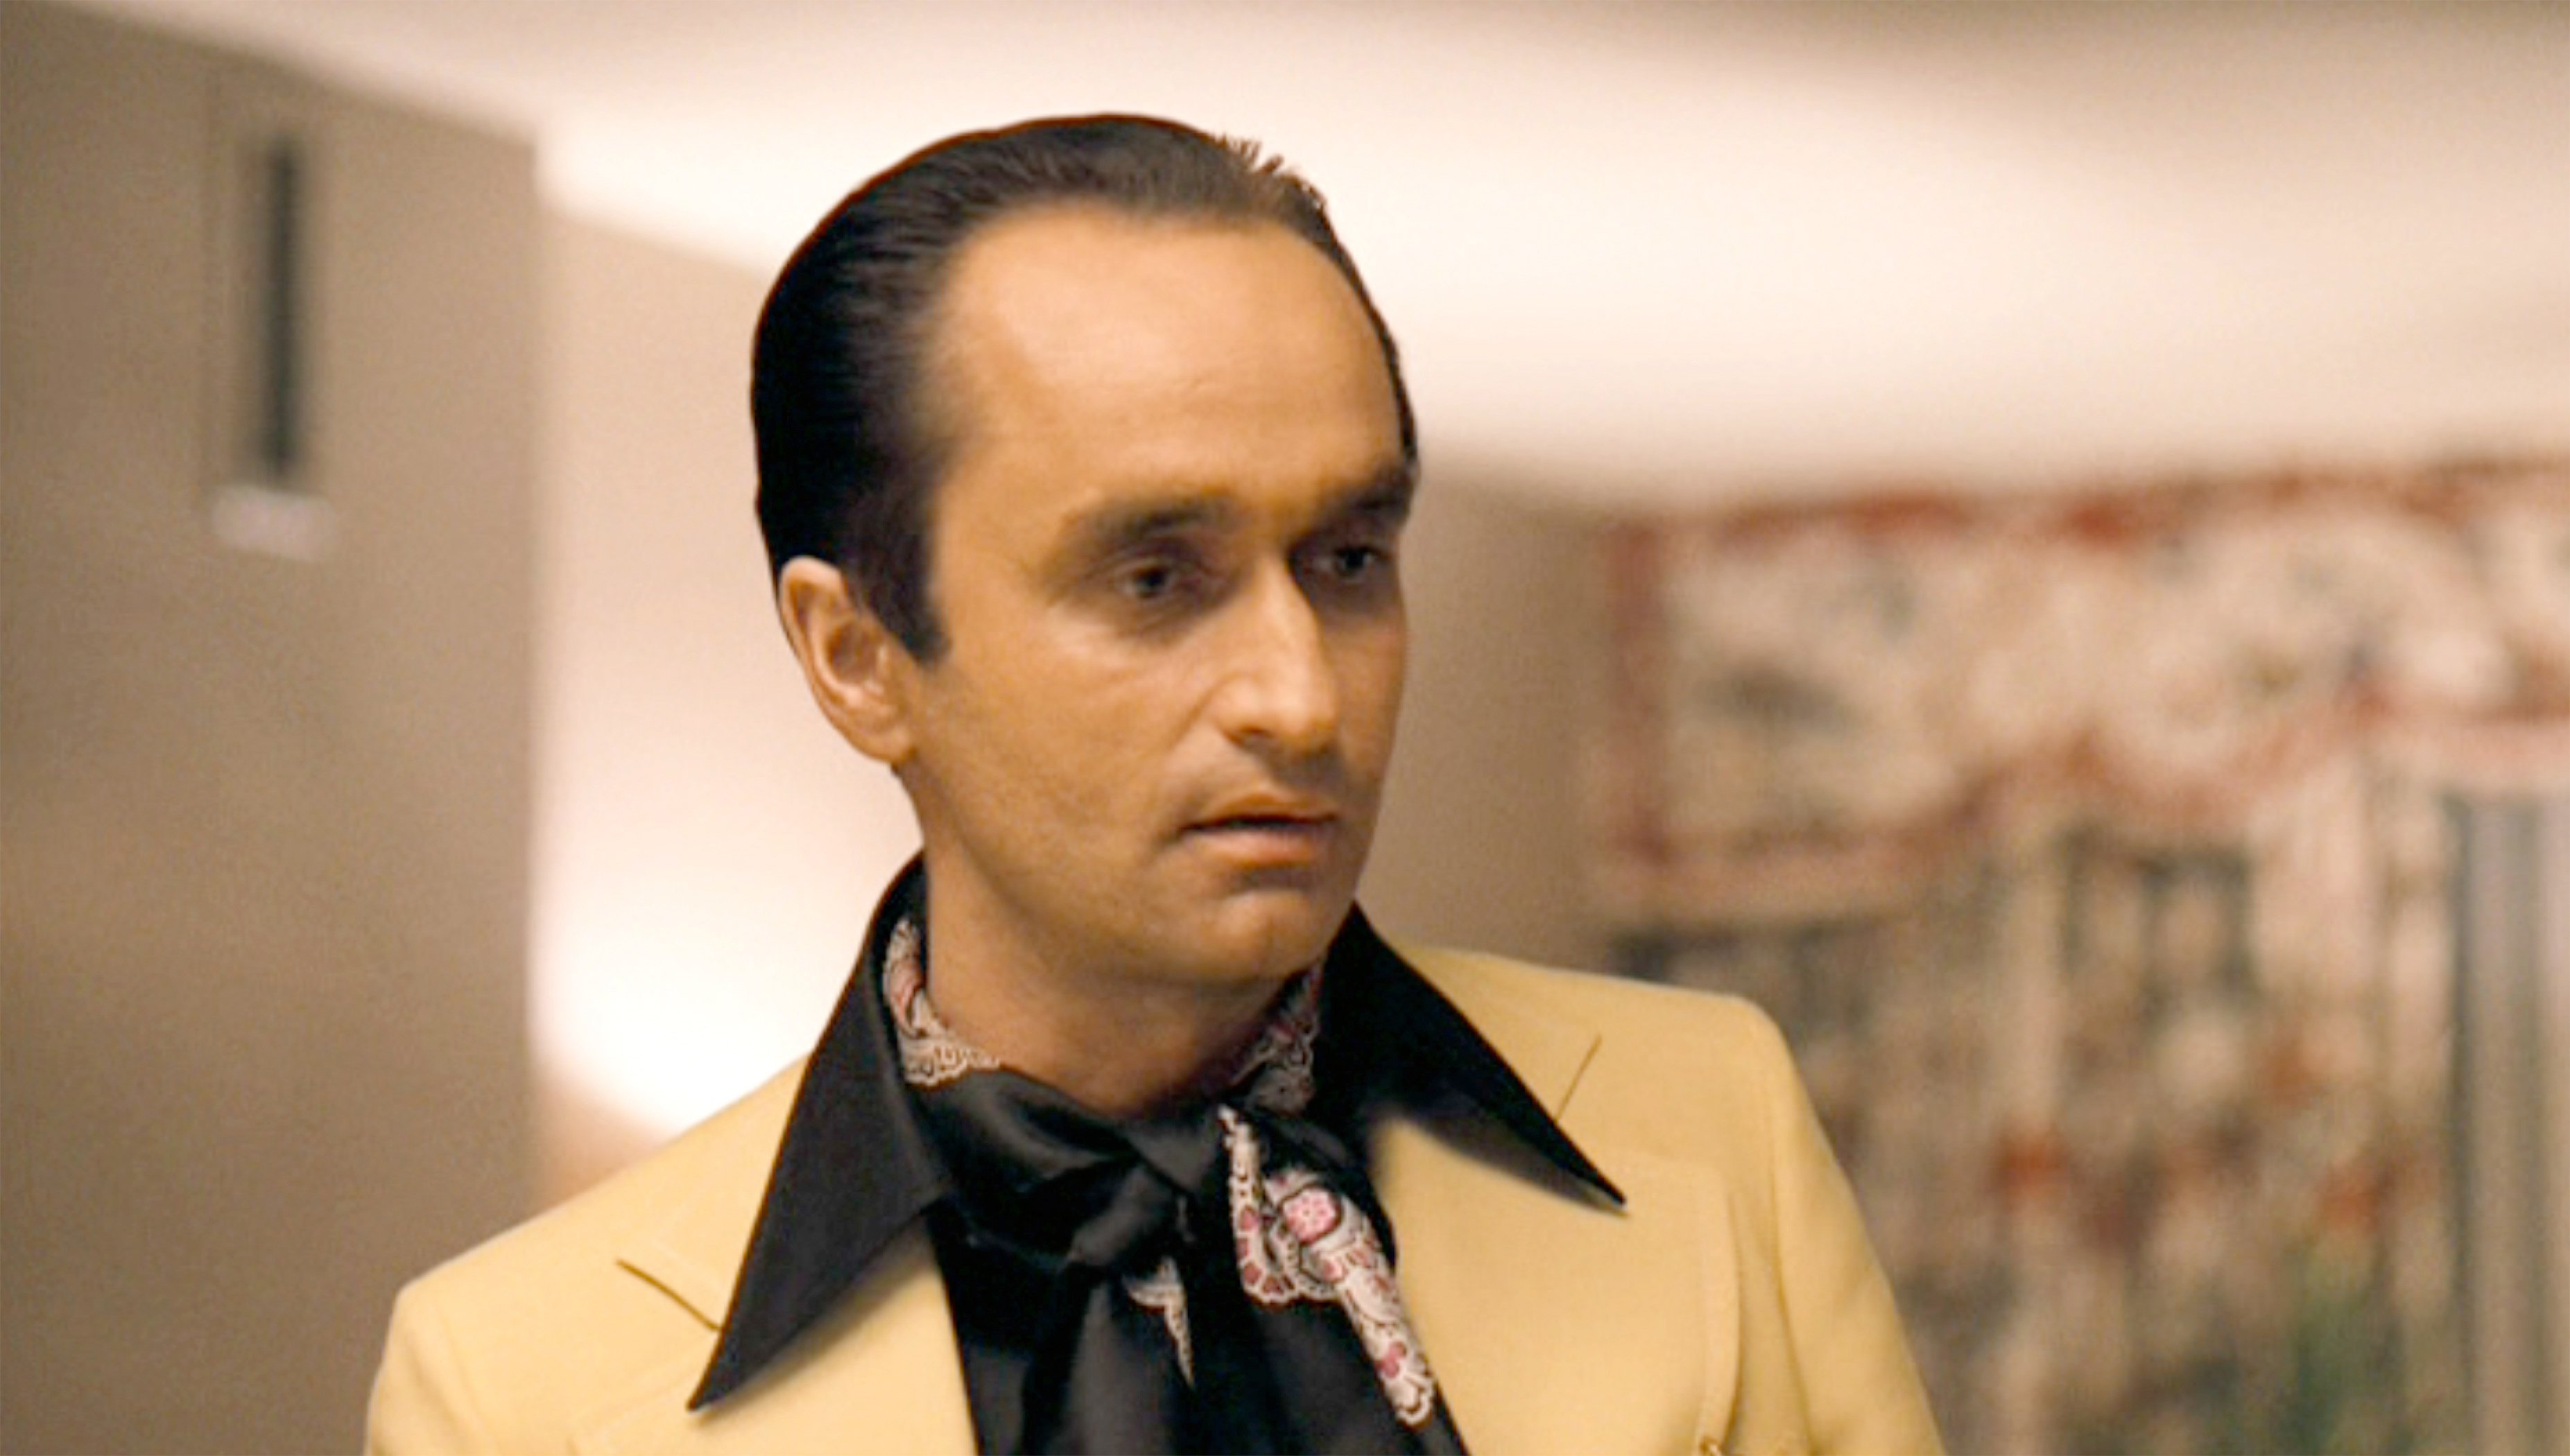 John Cazale in his role as Fredo Corleone in "The Godfather" | Source: Getty Images